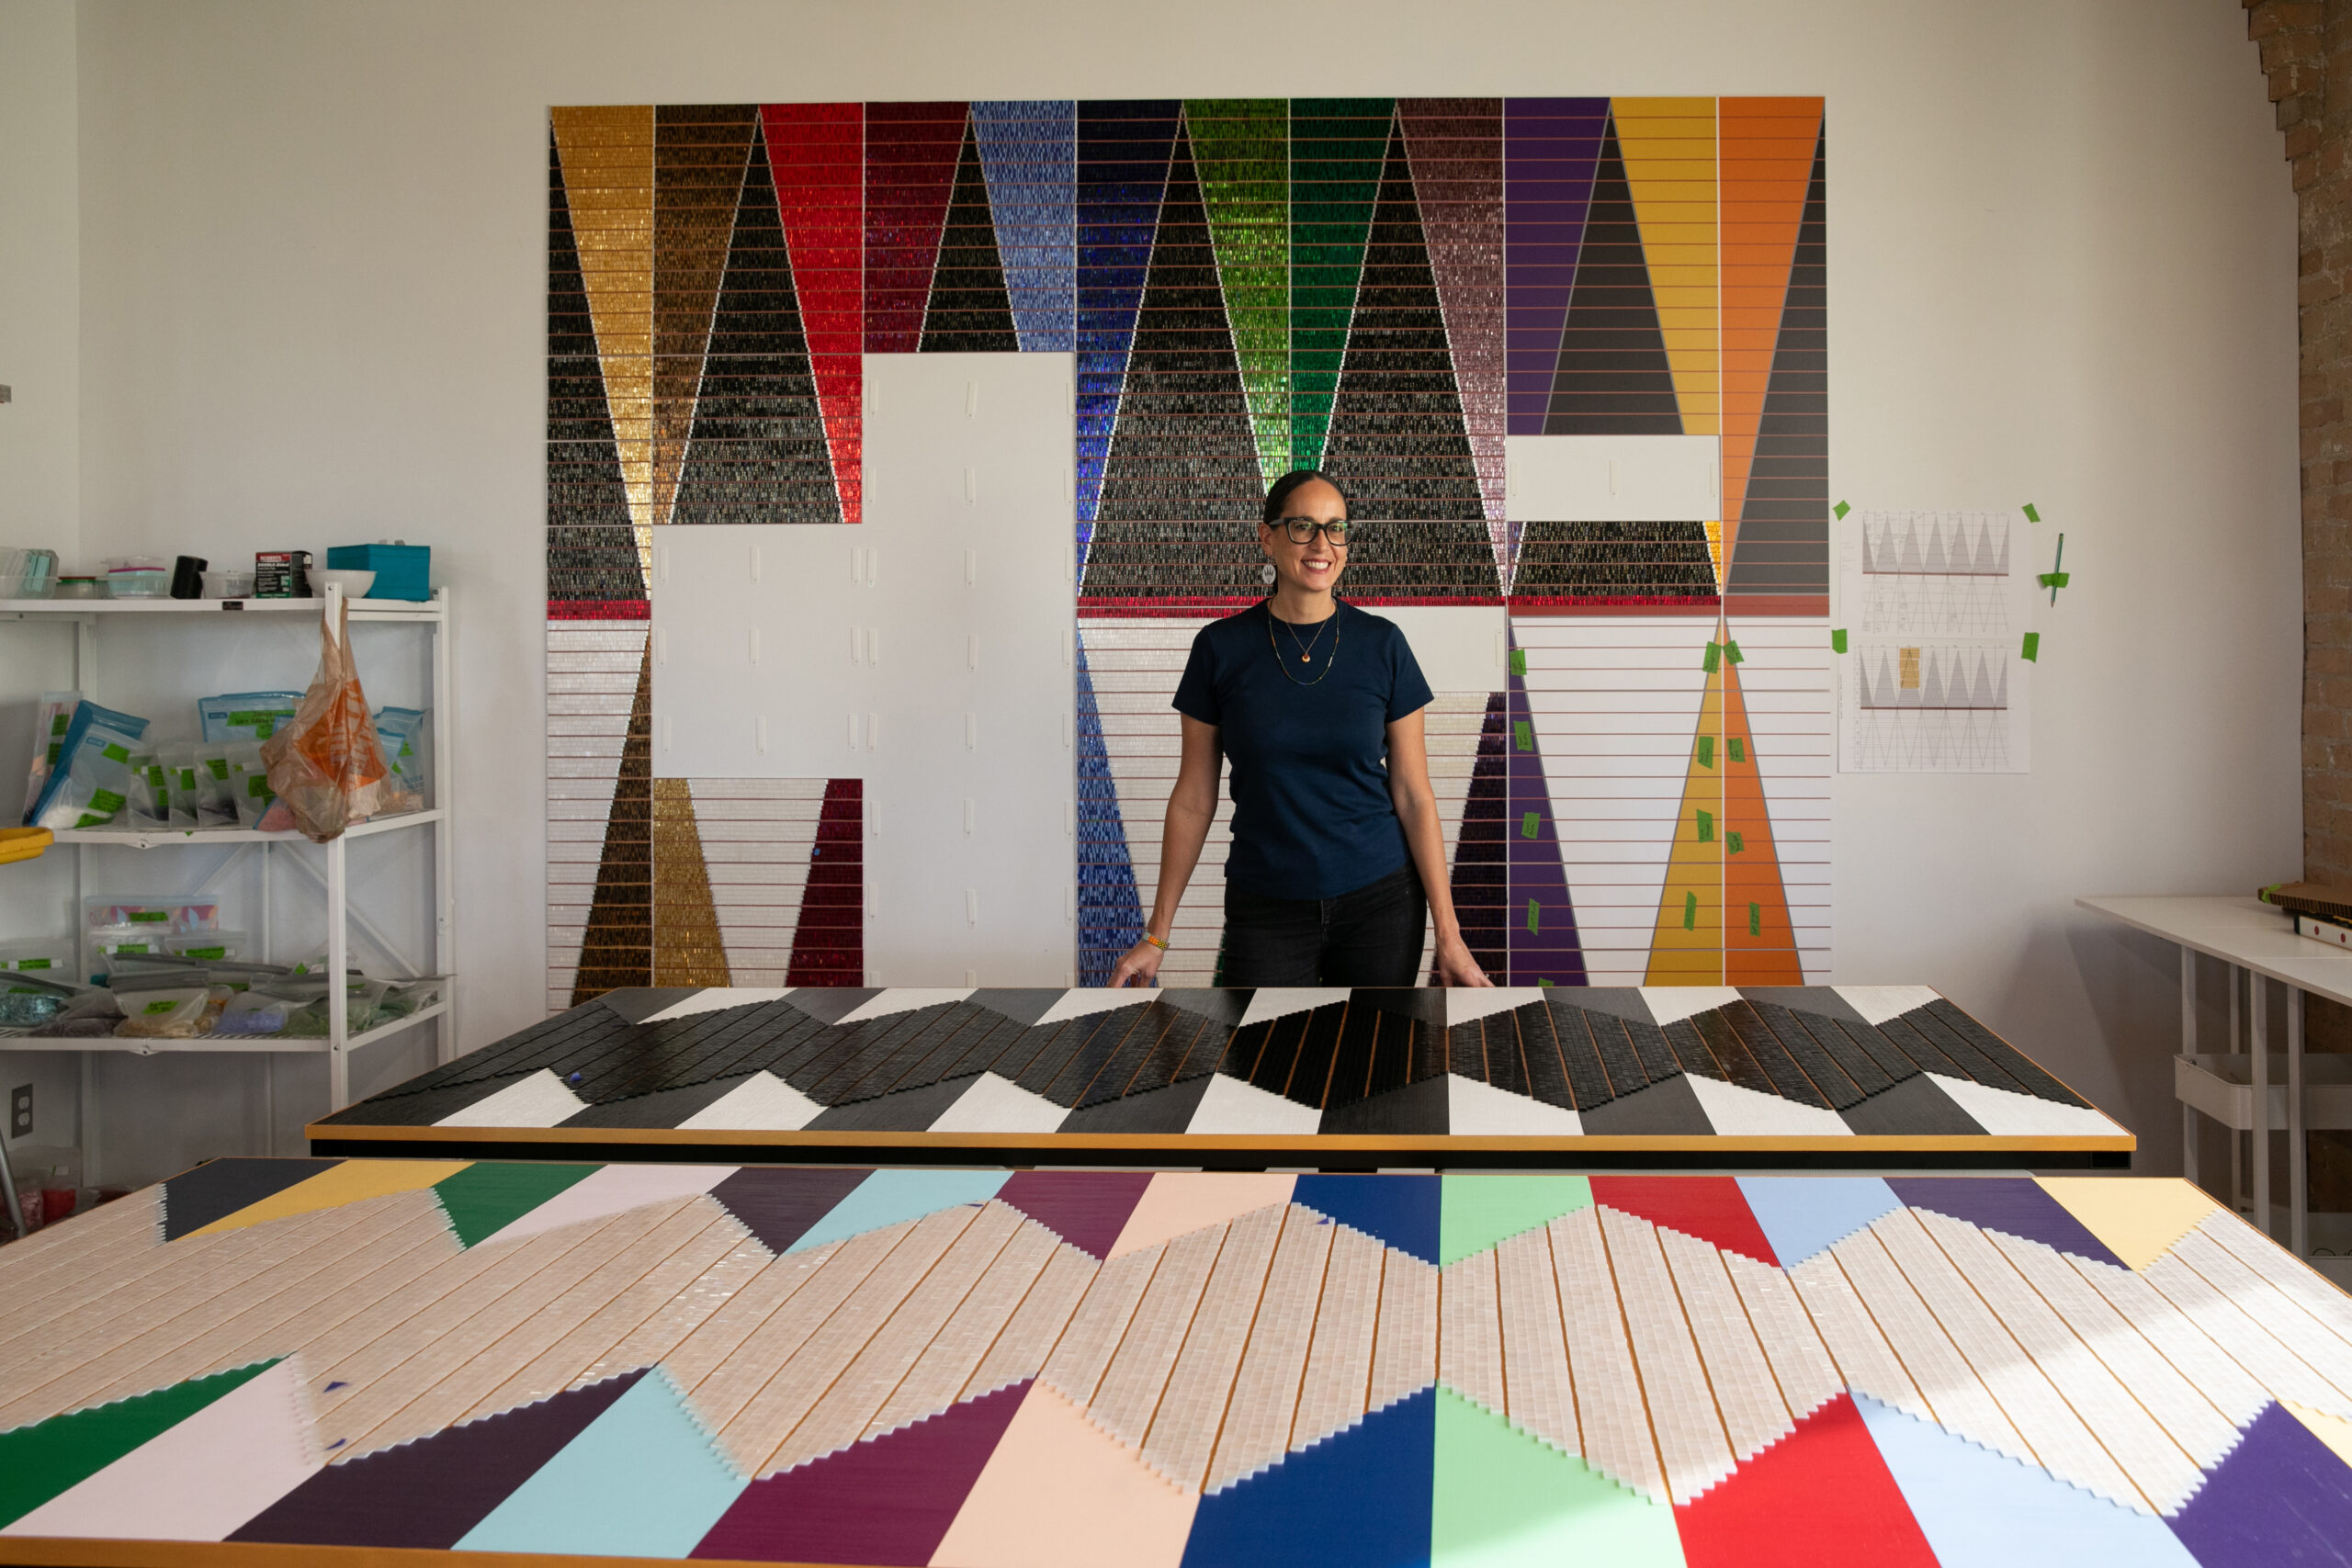 A person with dark hair and glasses stands at a table displaying colorful, geometric art. More artwork is shown in the background.